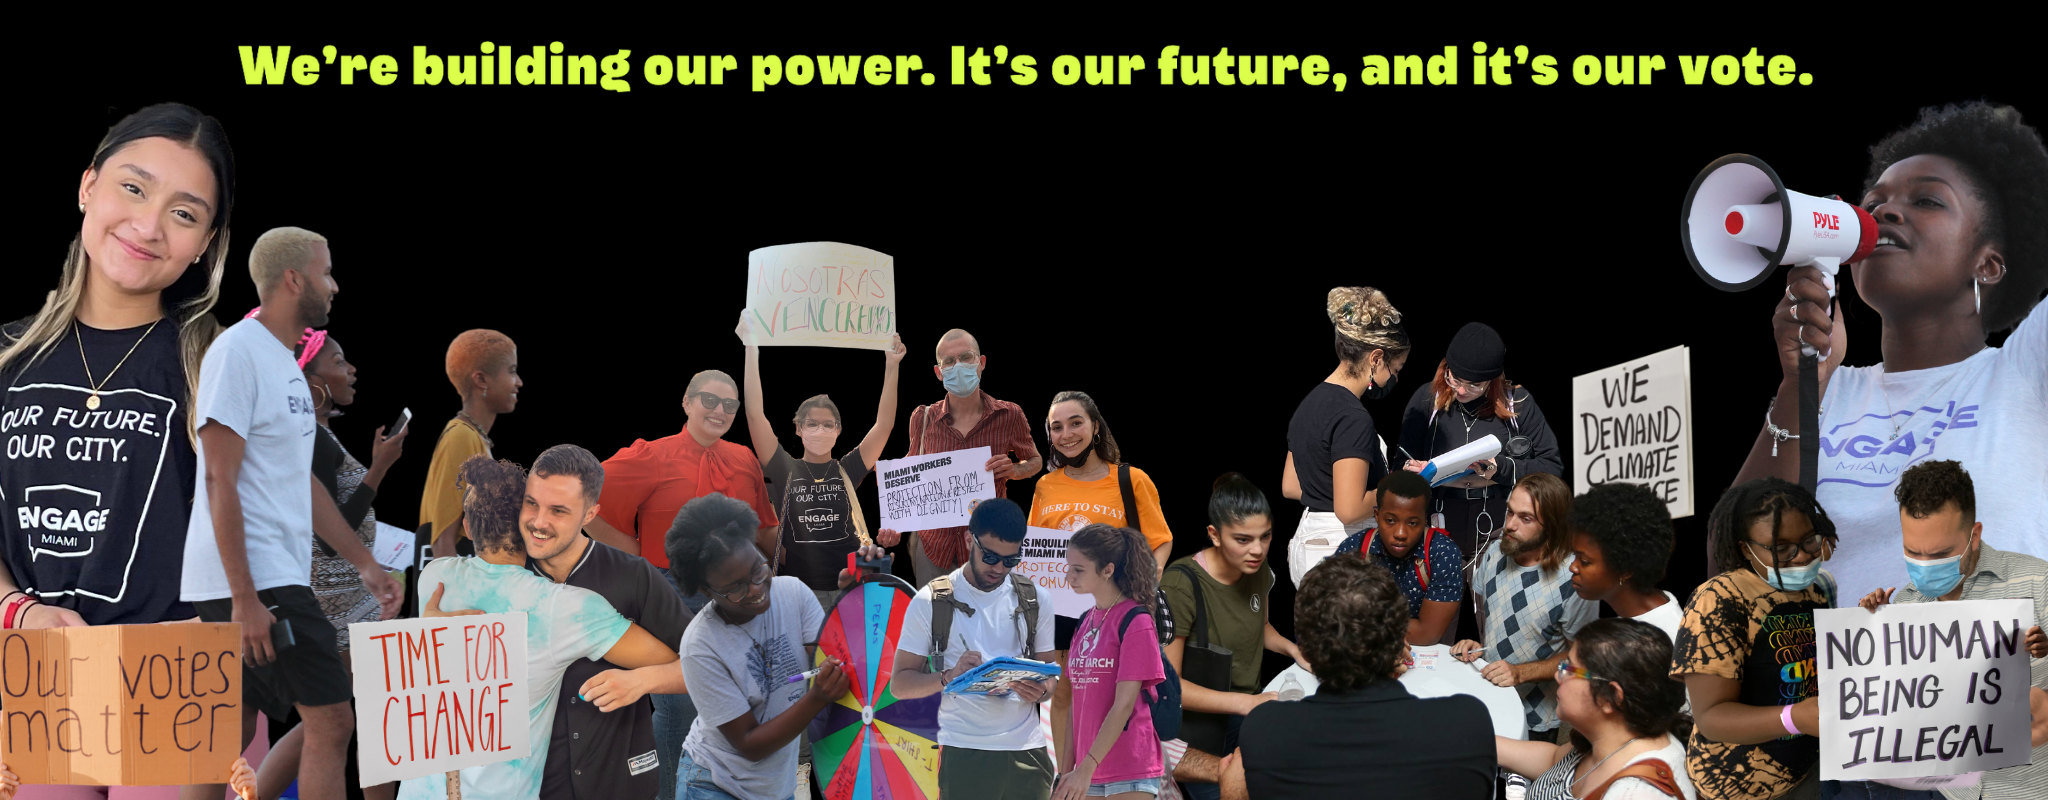 "We're building our power. It's our future, and it's our vote." In bold yellow font at the top of the image. There's a collage of Engage Miami members, volunteers, staff, canvassers, and fellows out in the field registering voters, attending marches, speaking at government hearings, and canvassing.